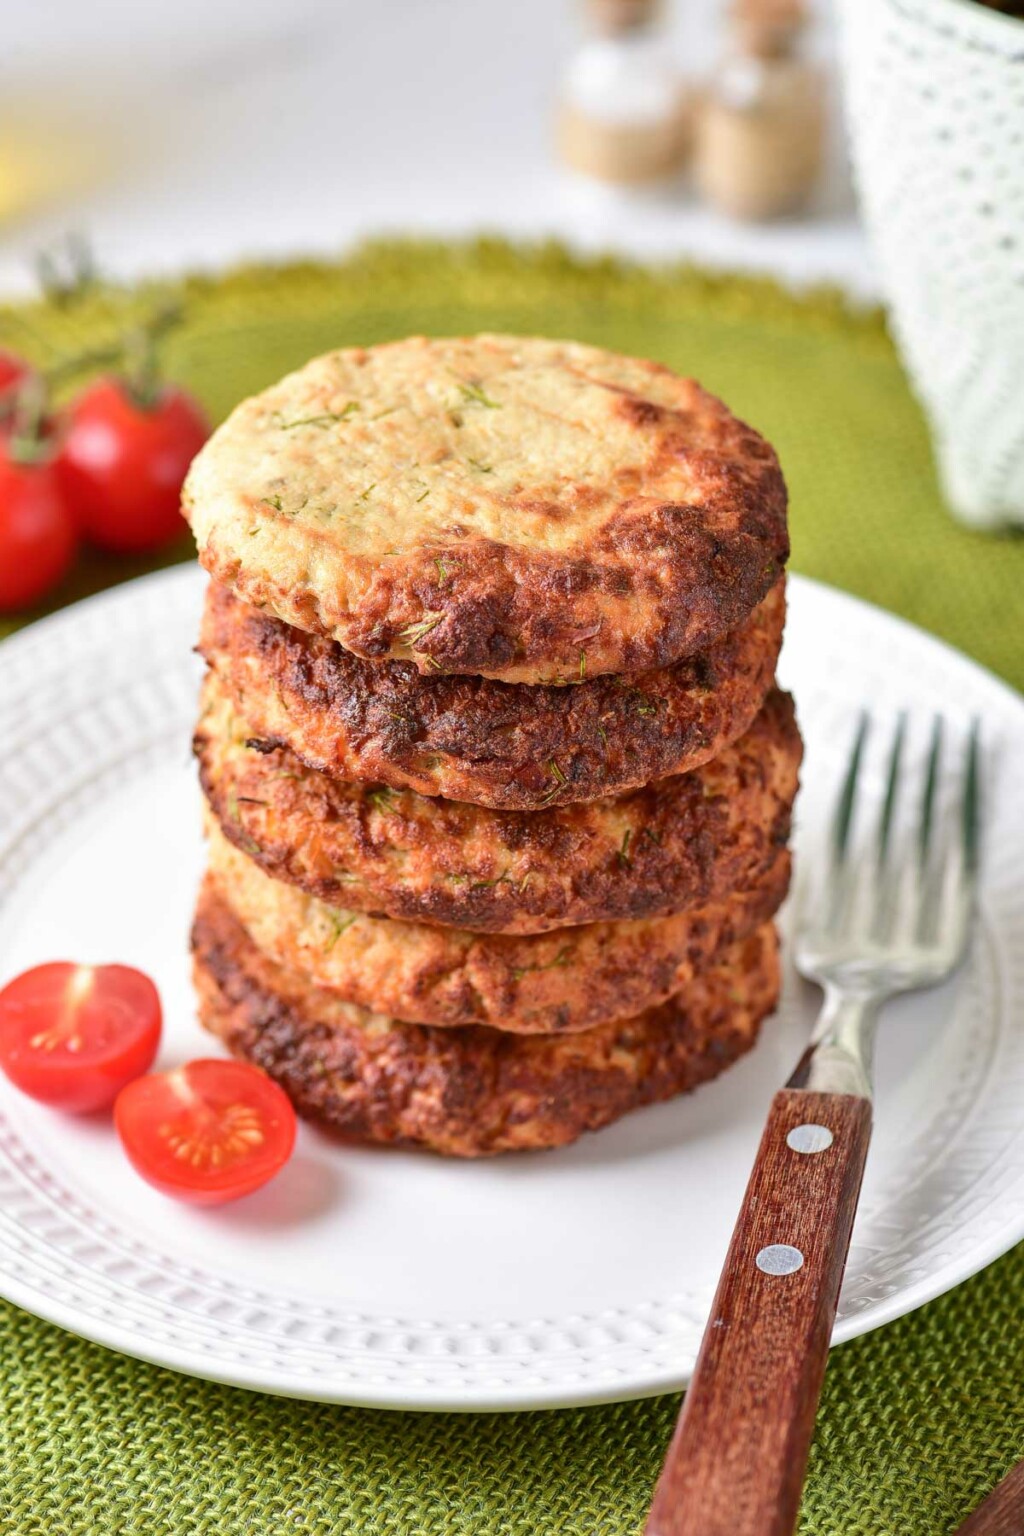 Turkey Patties (Use Up Leftover Turkey) - Recipes From A Pantry